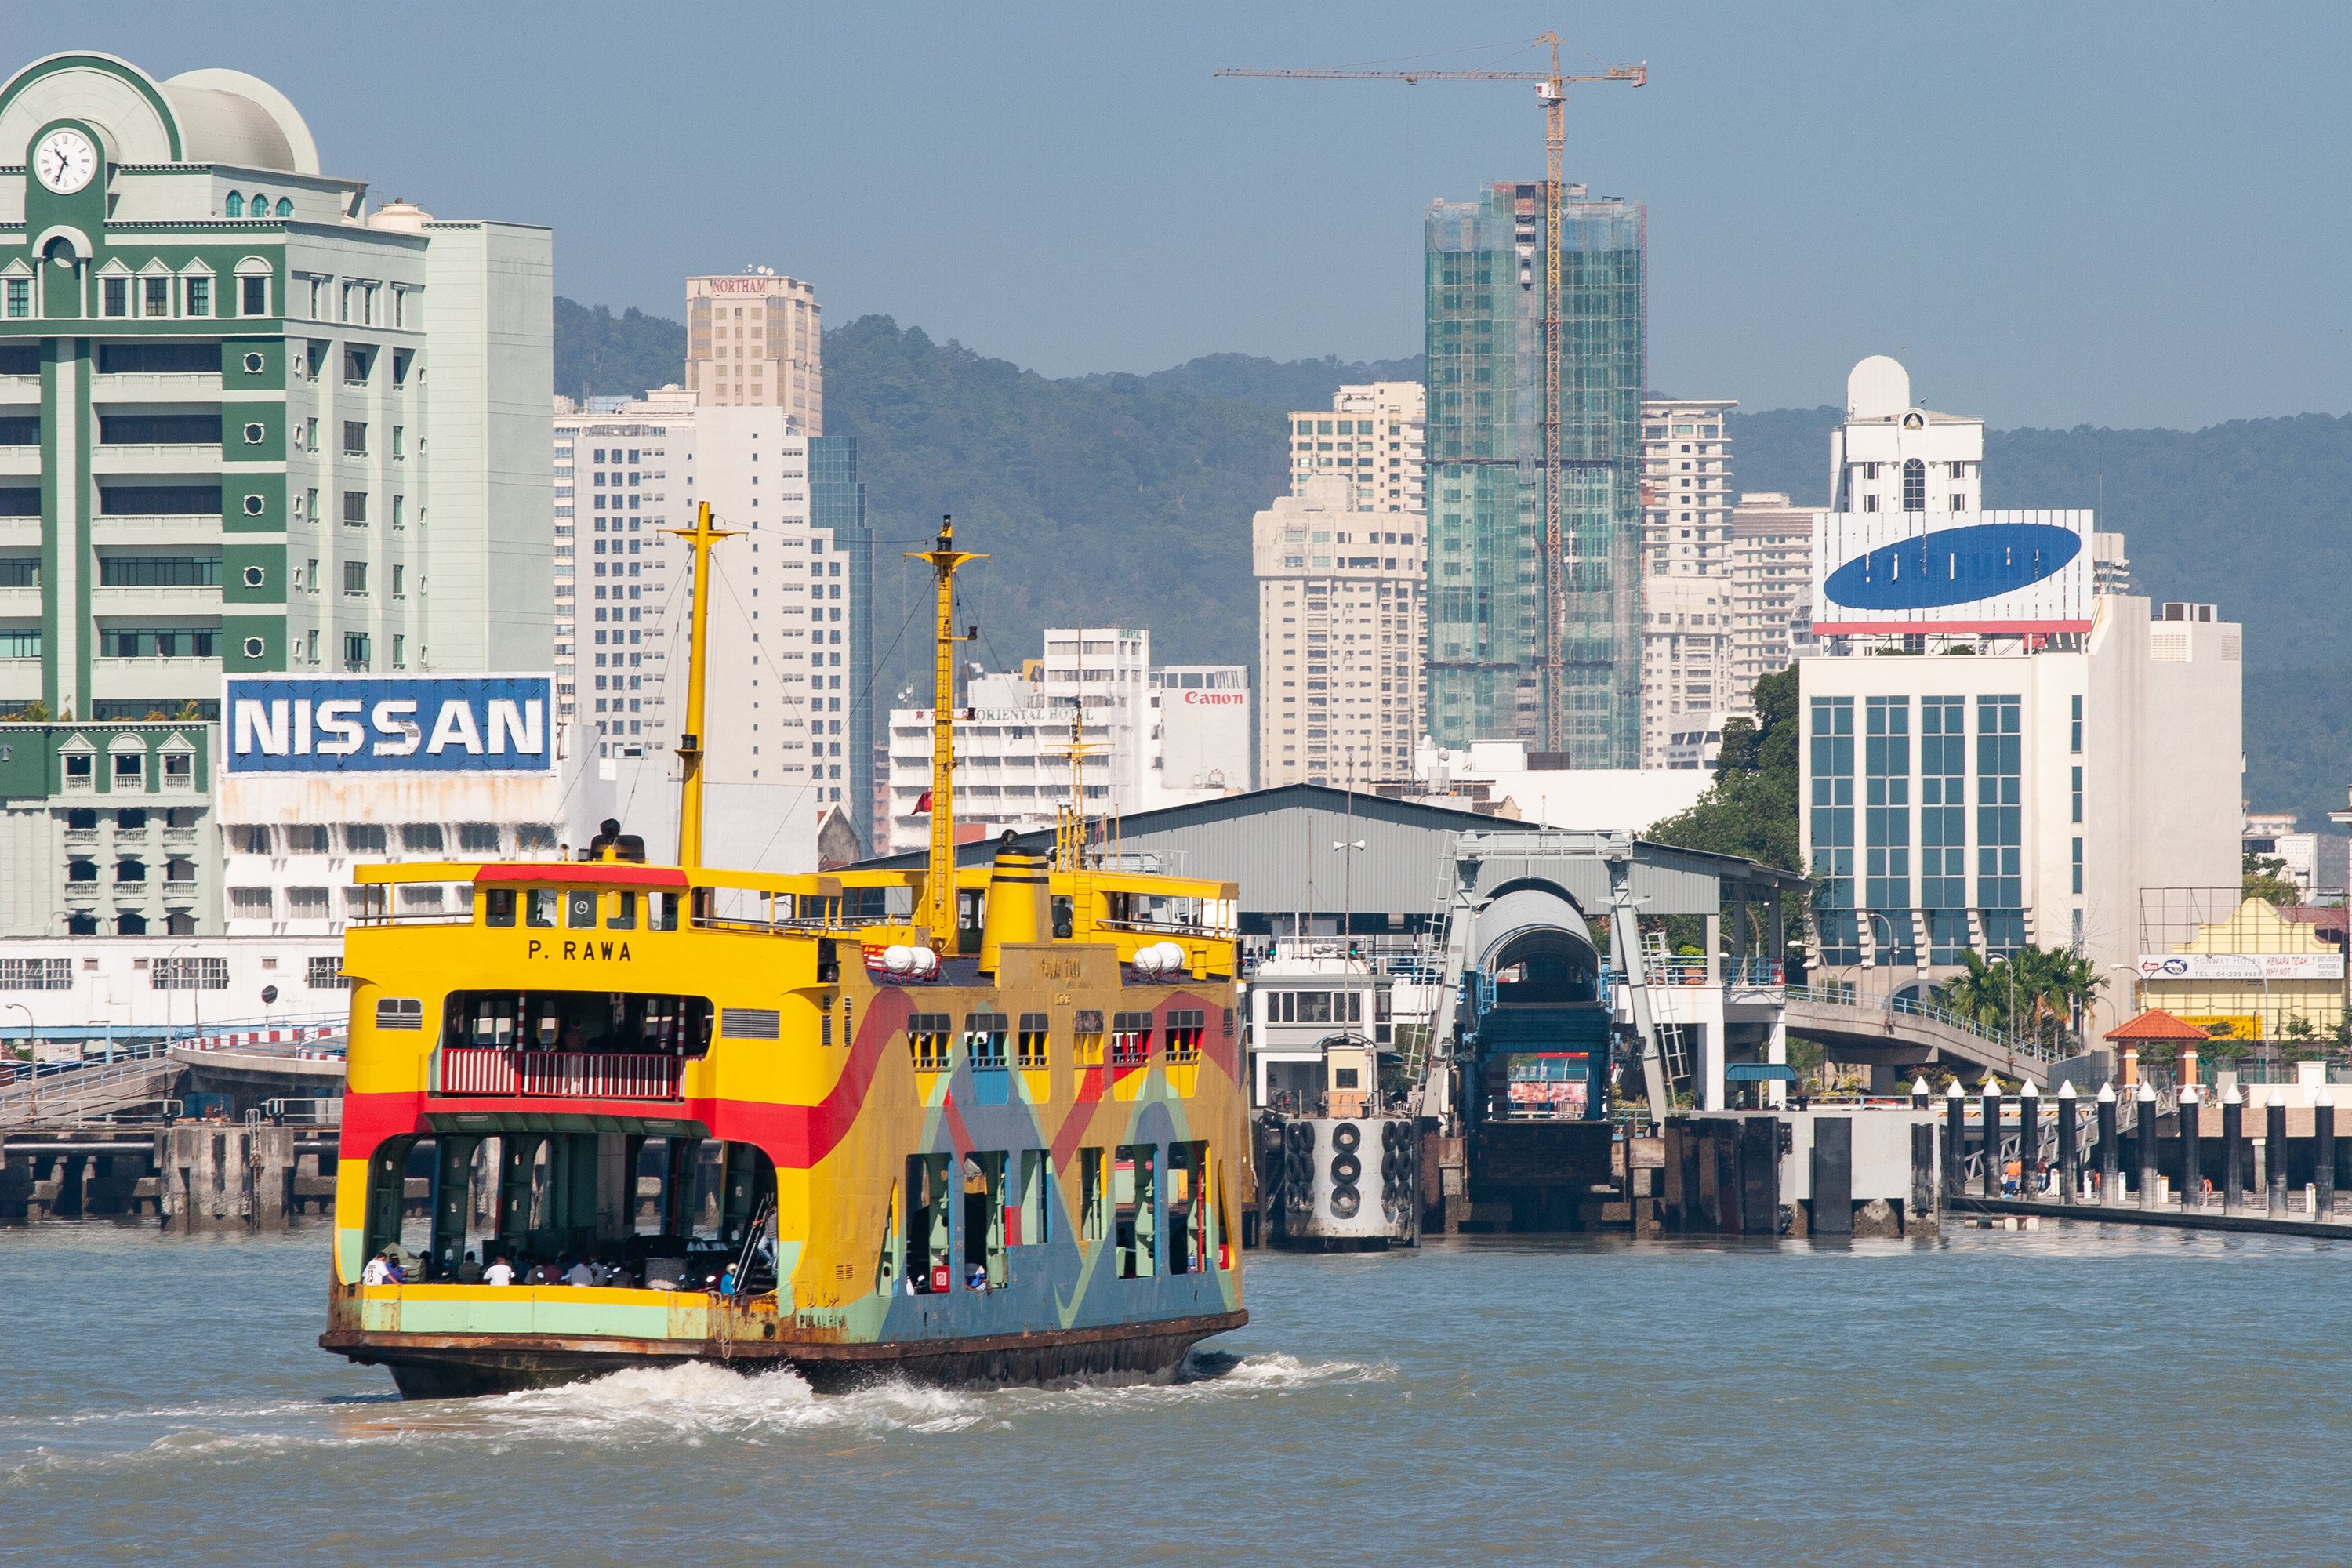 A double-decker ferry like those being preserved nears shore in Penang, Malaysia, in 2006. Ferries have sailed between the island and the mainland since the 1890s. Photo: Thum Chia Chieh